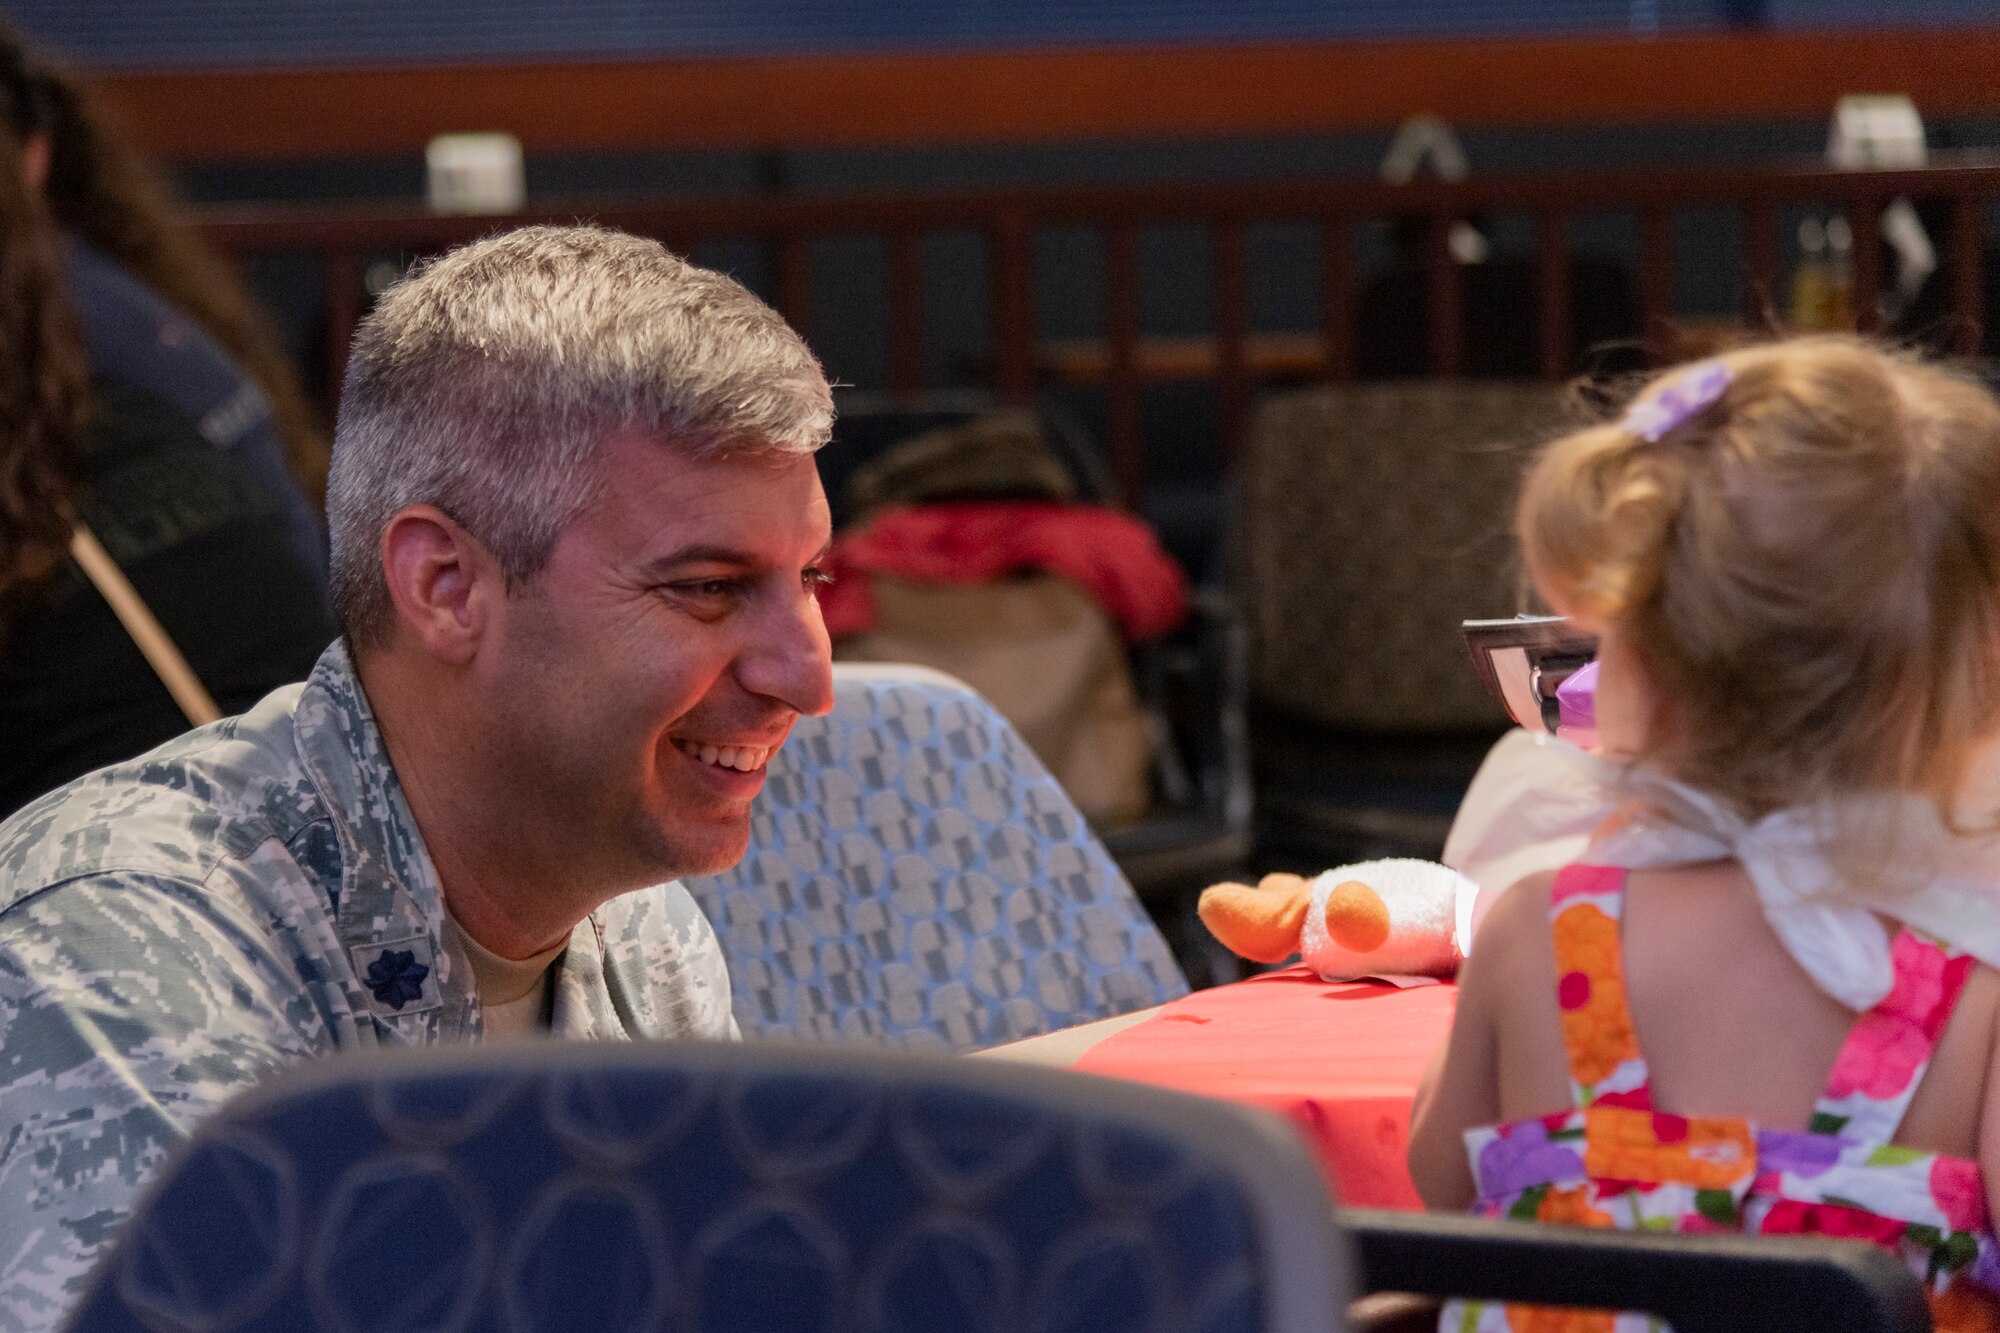 Lt. Col. Thane Sisson, 23d Maintenance Squadron commander, talks with a participant of a deployed spouse dinner, June 18, 2019, at Moody Air Force Base, Ga. The dinner served as an opportunity for the families of deployed members to bond and provide relief. The mission's success depends on resilient Airmen and families, who are prepared to make sacrifices with the support of their fellow Airmen, local communities and leadership. (U.S. Air Force photo by Airman 1st Class Hayden Legg)